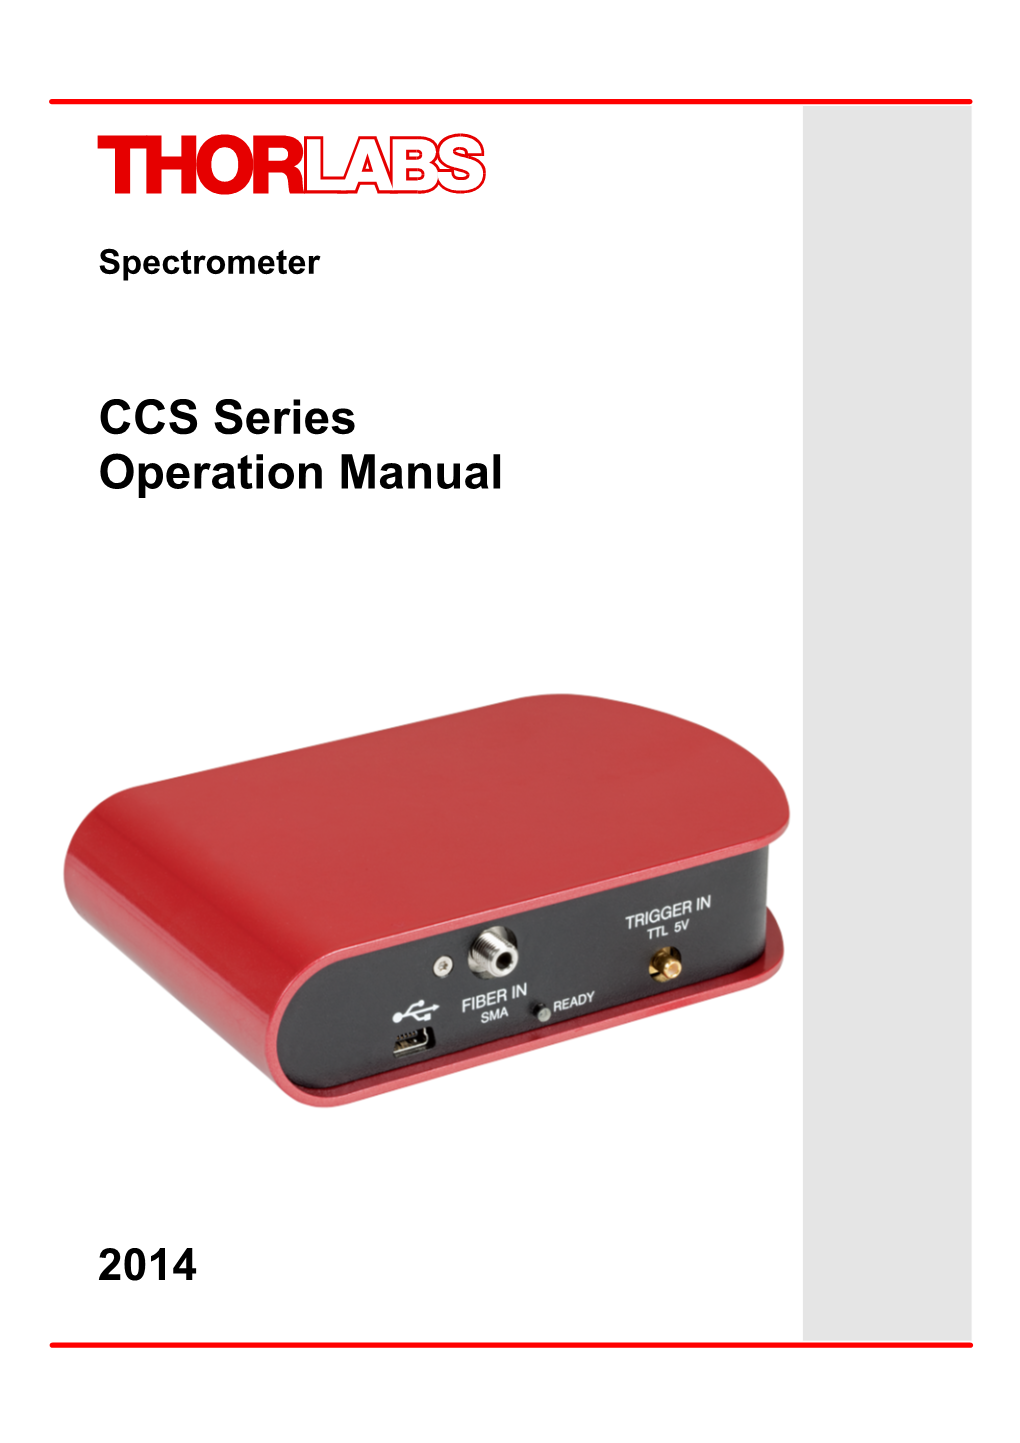 CCS Series Spectrometer 1 General Information the CCS Series Spectrometer Is Designed for General Laboratory Use